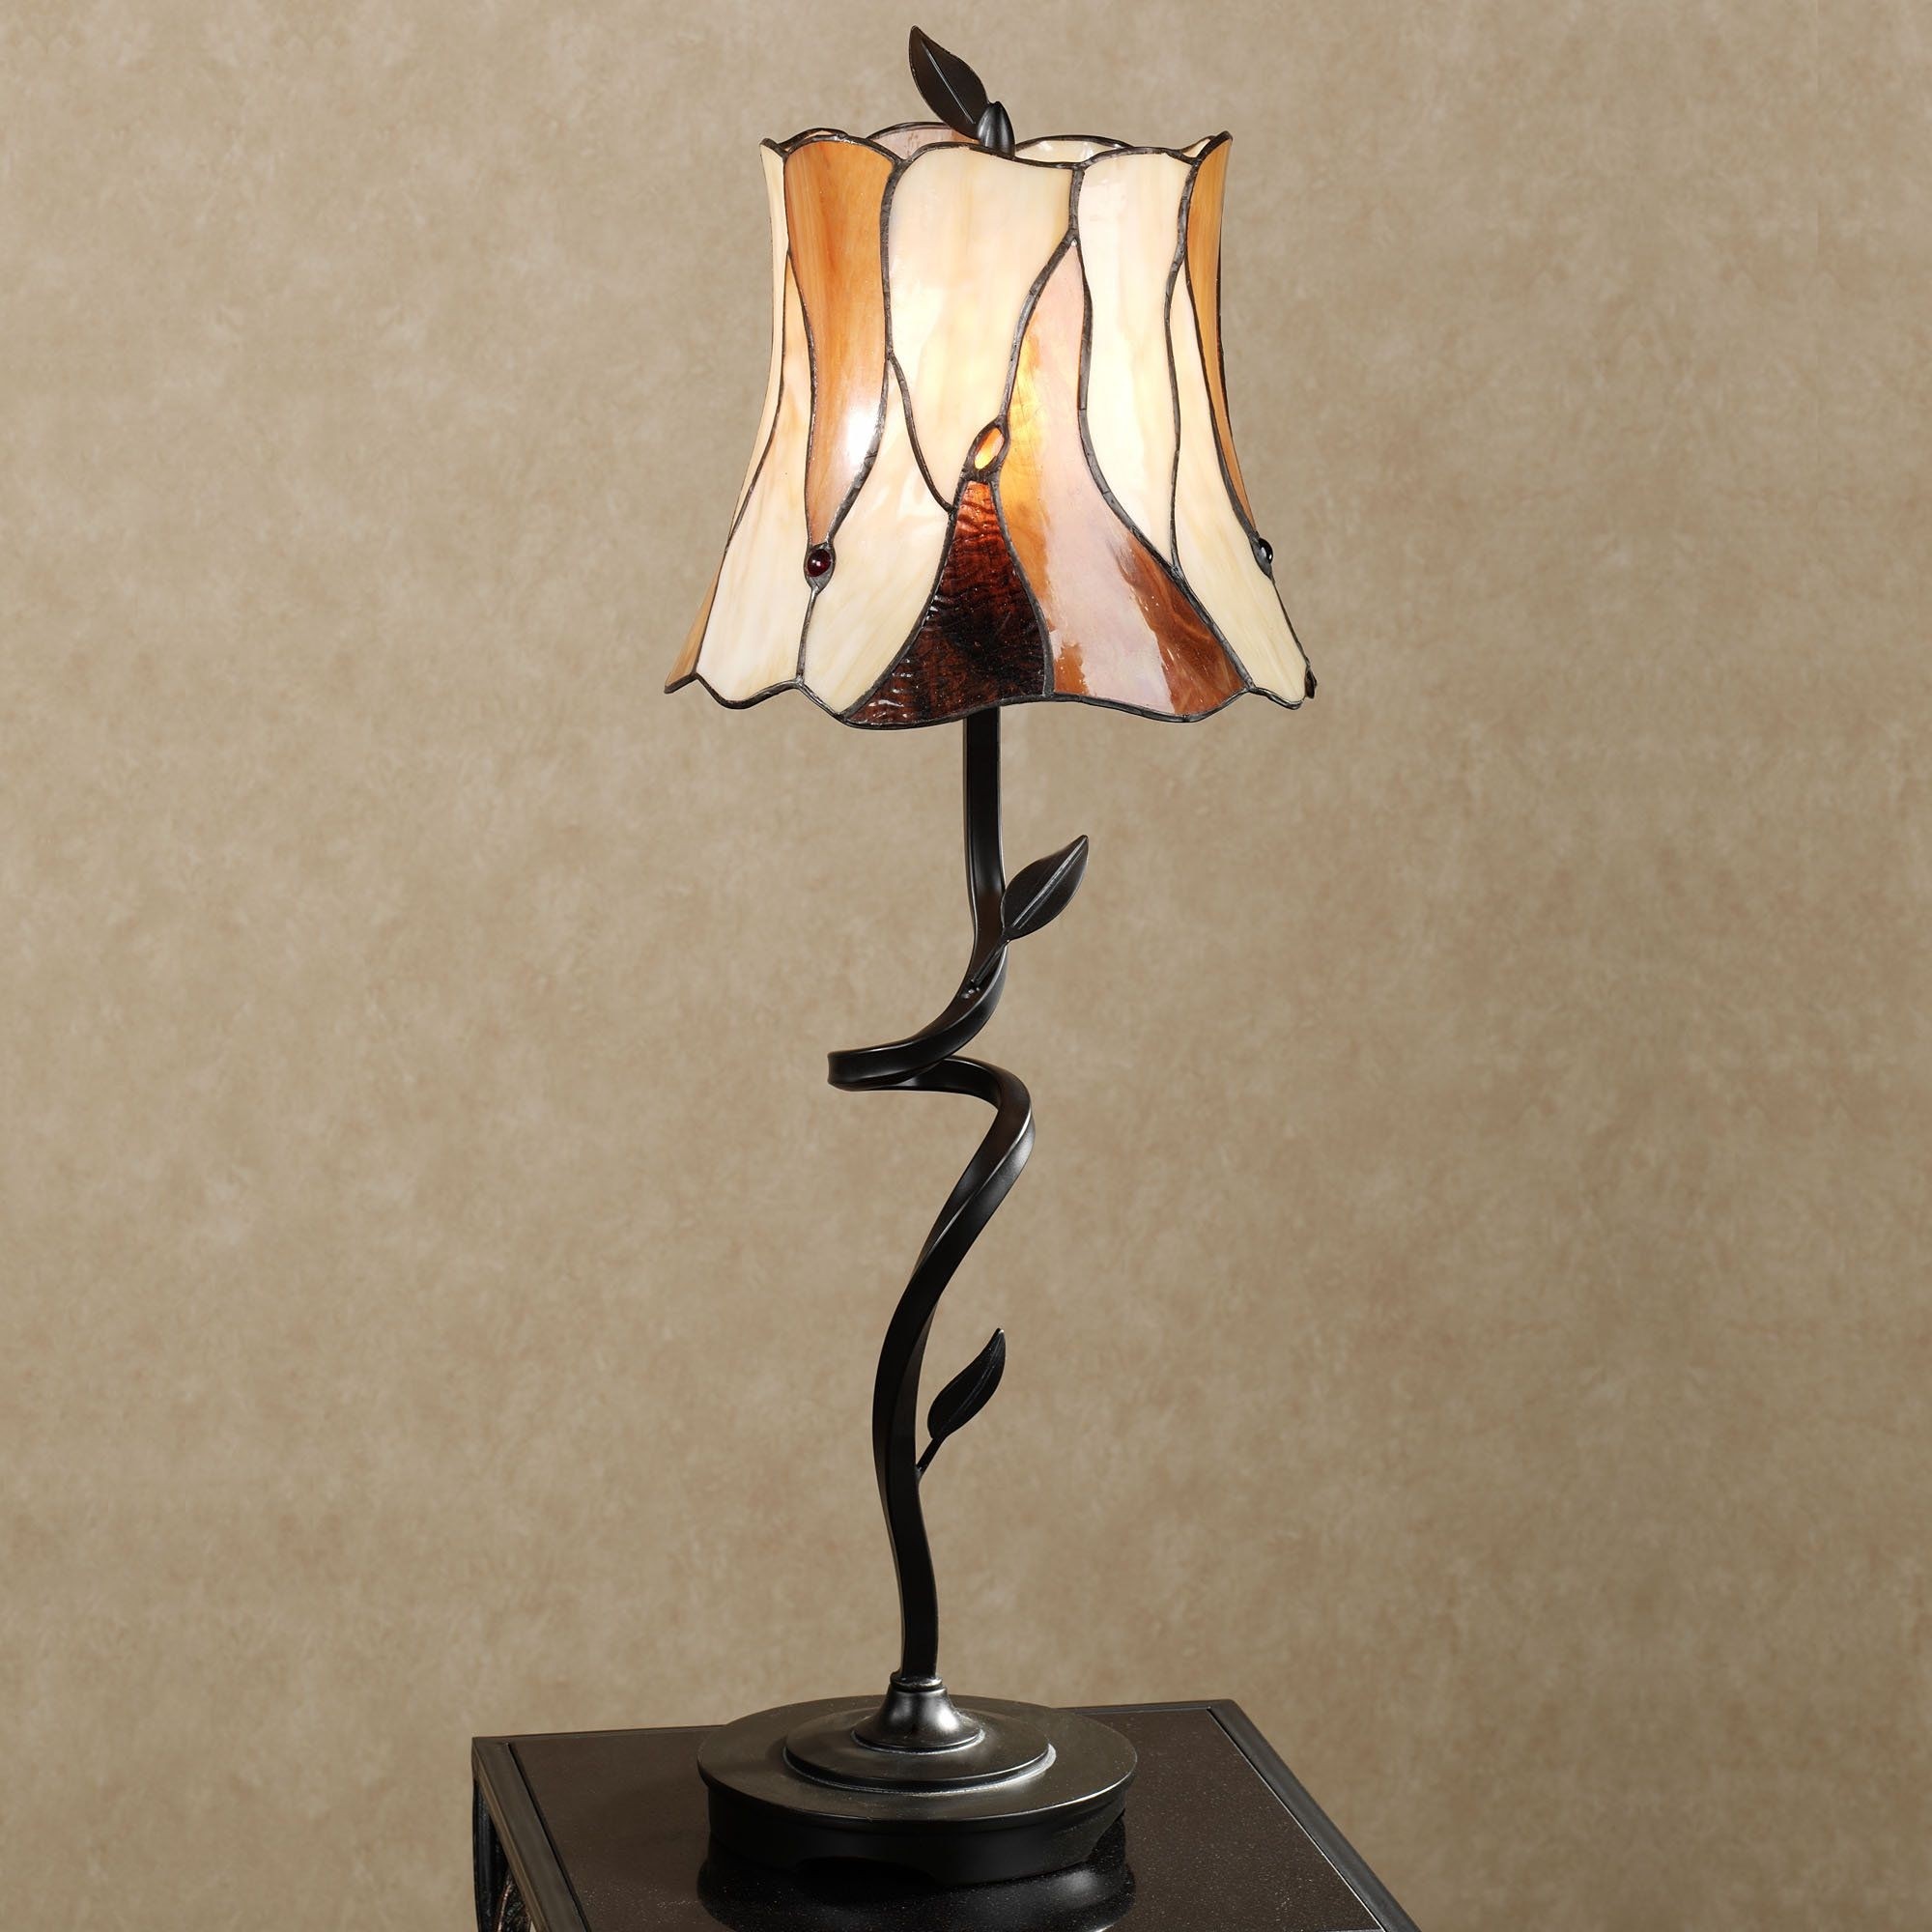 Glass lamp shades for table lamps replacements